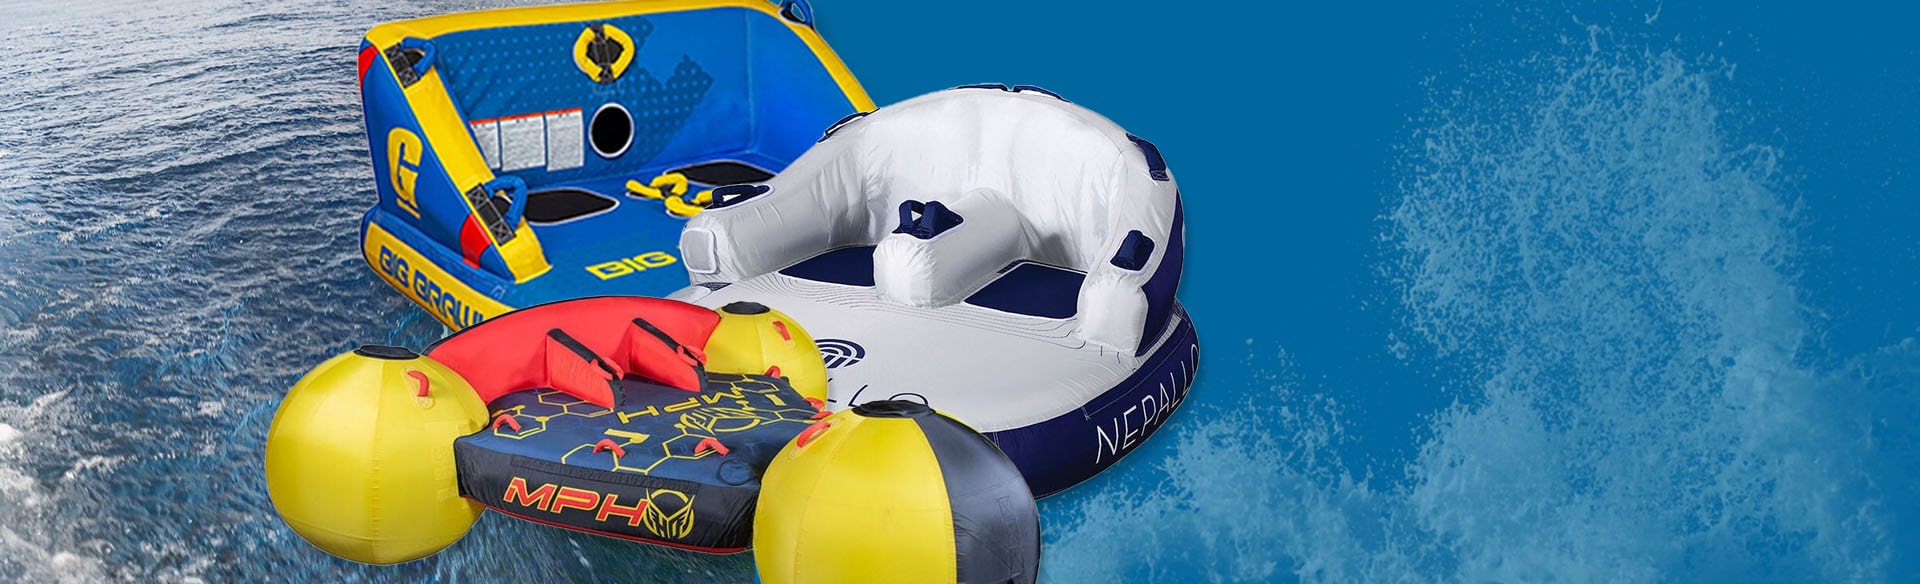 Up to 50% off Towables, Life Jackets, Wakeboards & More